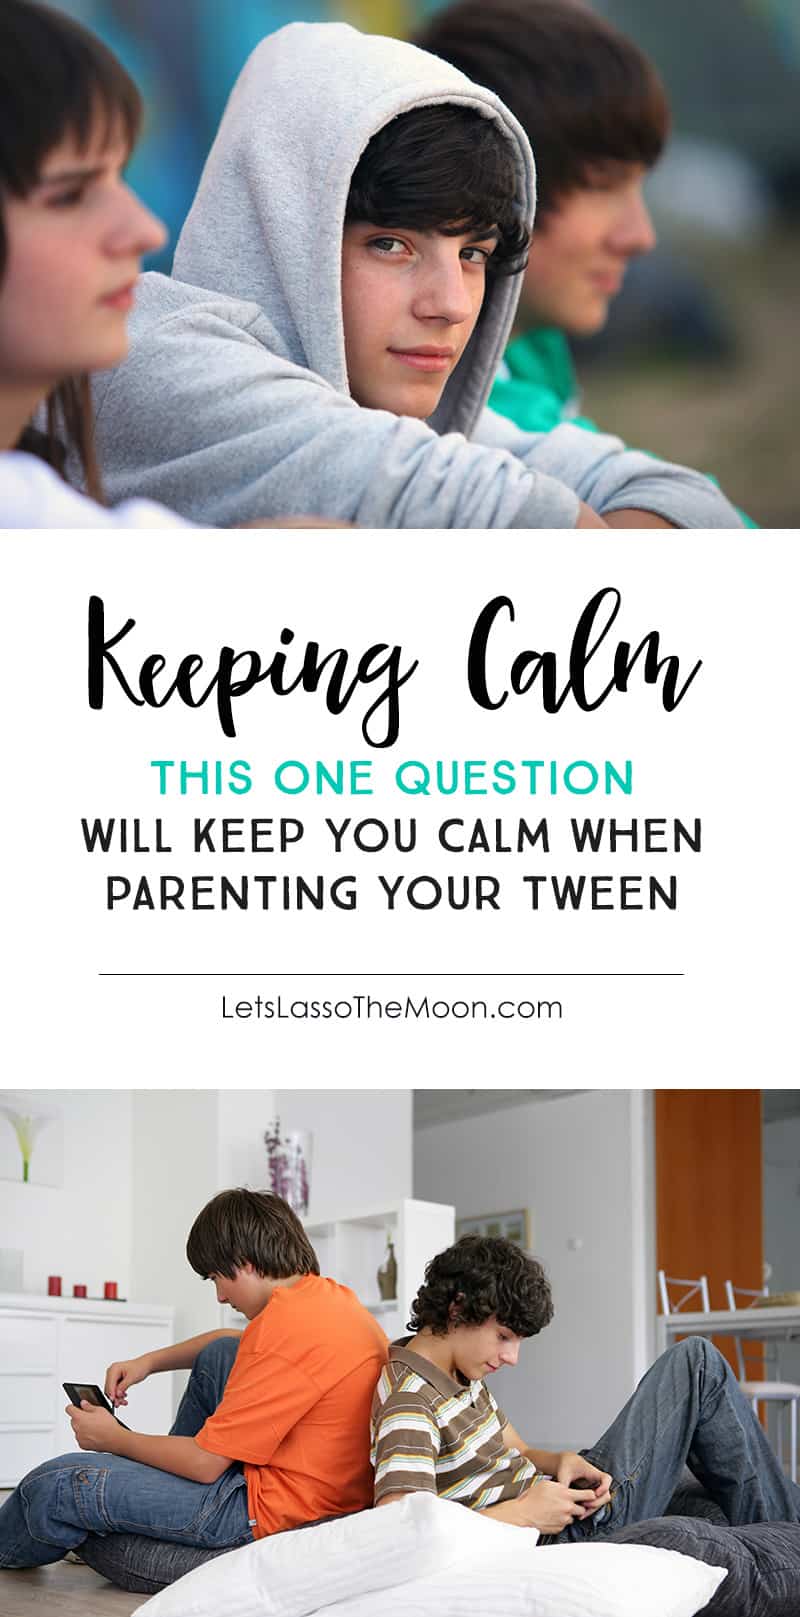 This One Question Will Keep You Calm When Parenting Your Tween *So simple. Great tip.